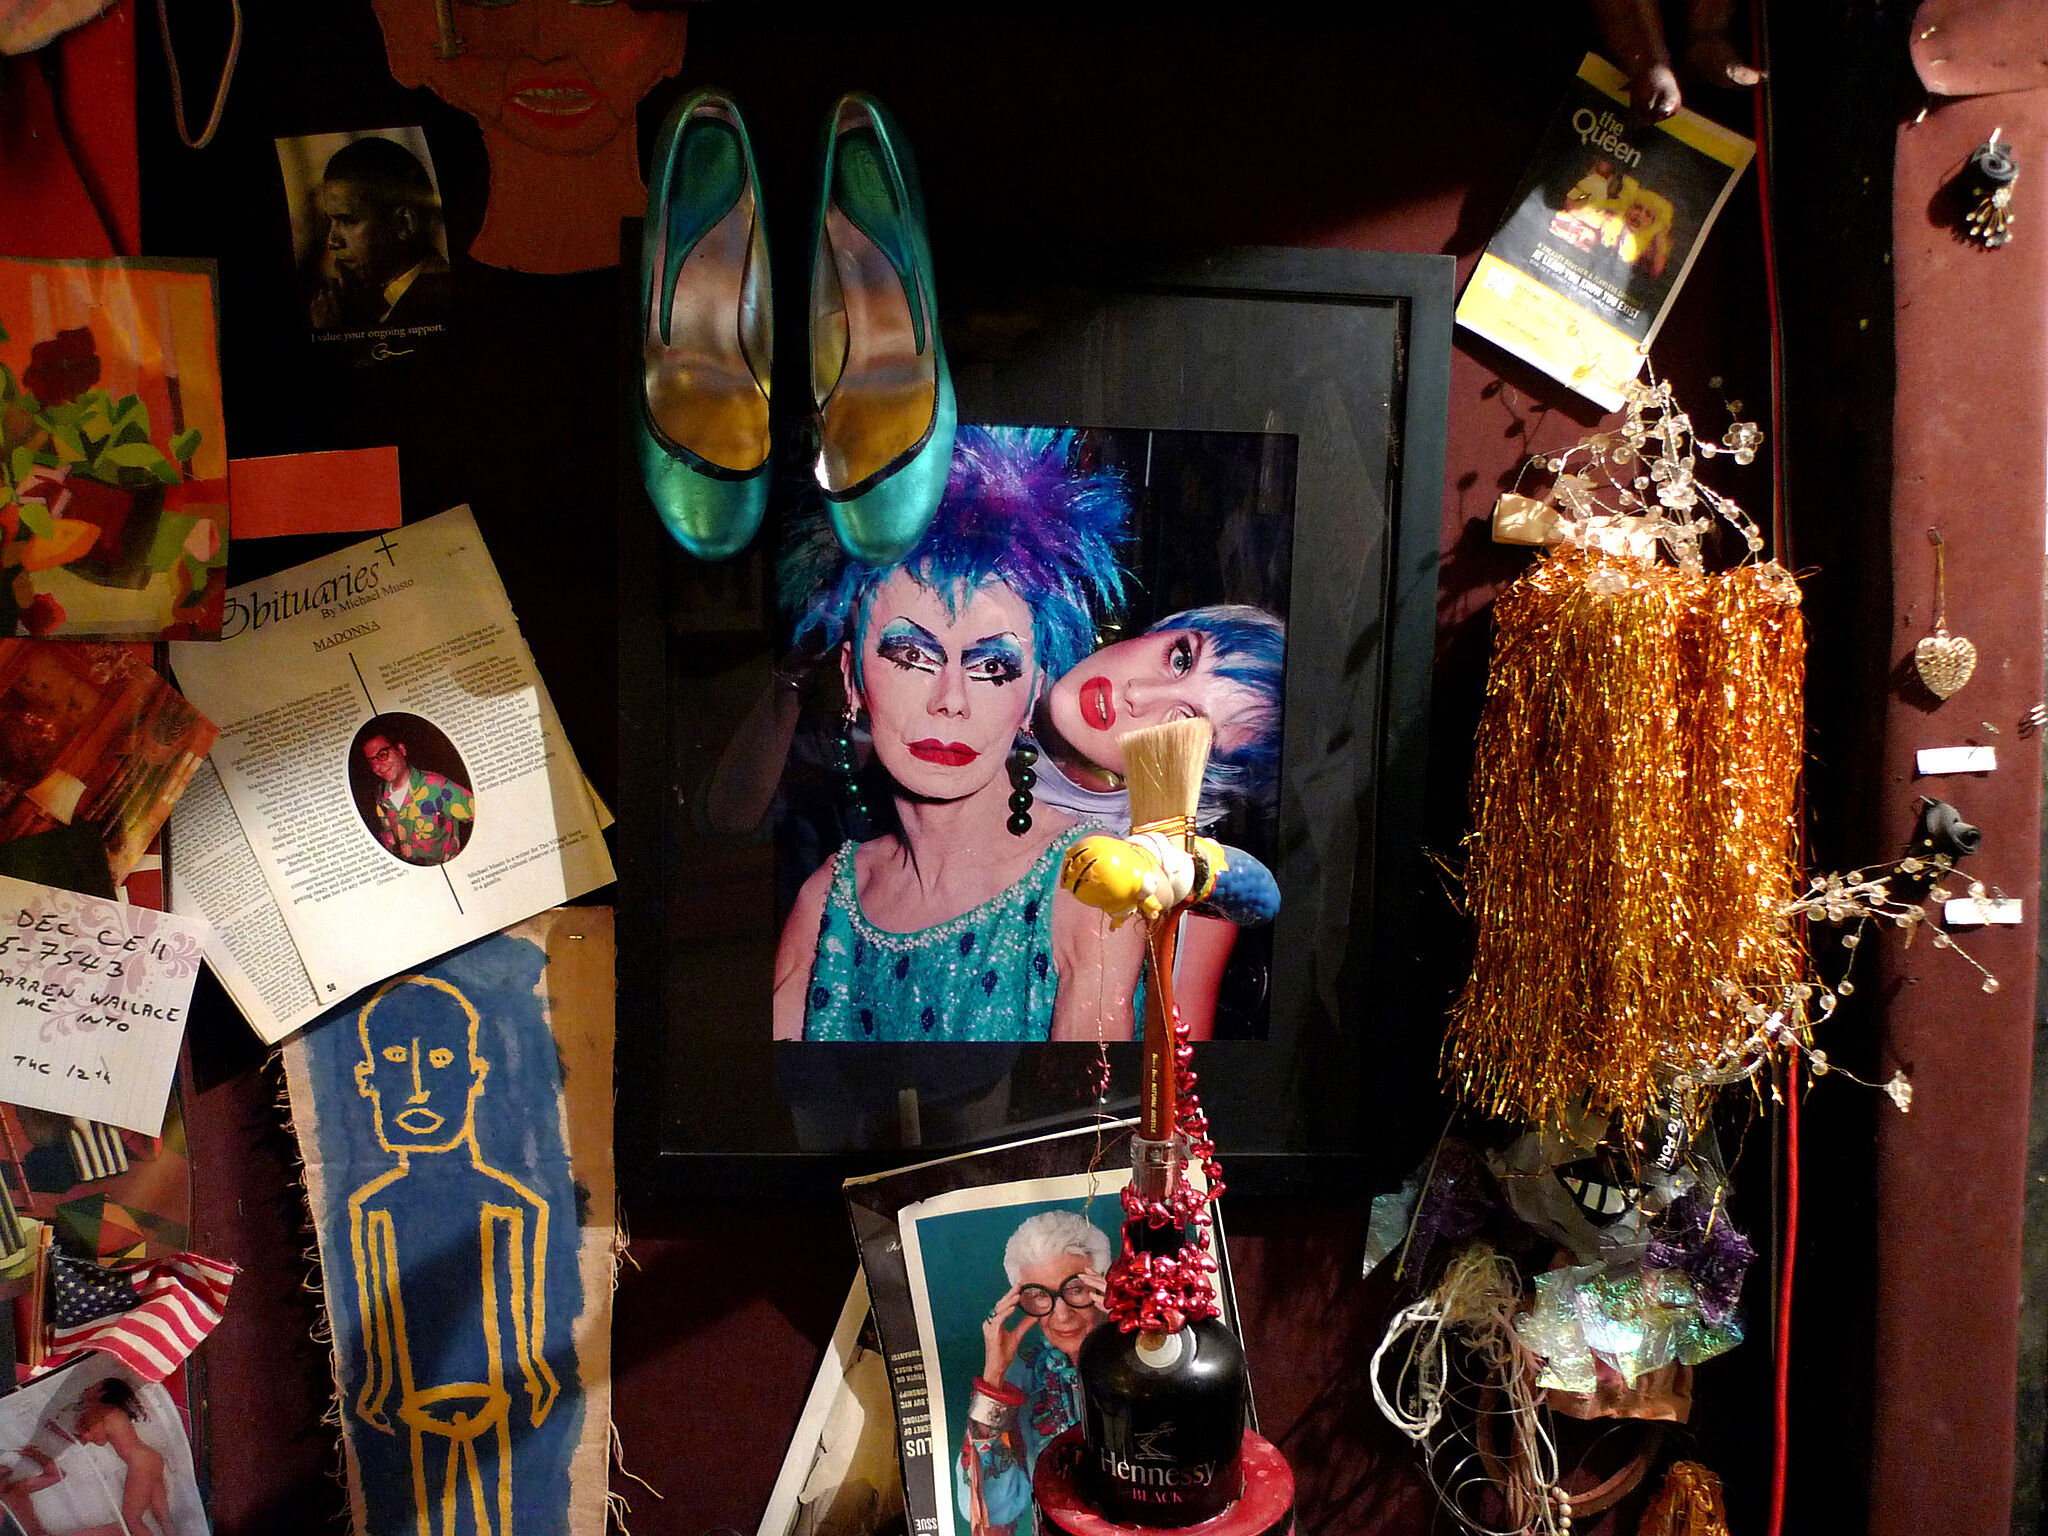 Eclectic memorabilia wall with a framed photo of a woman in drag, hanging teal shoes, and various trinkets.